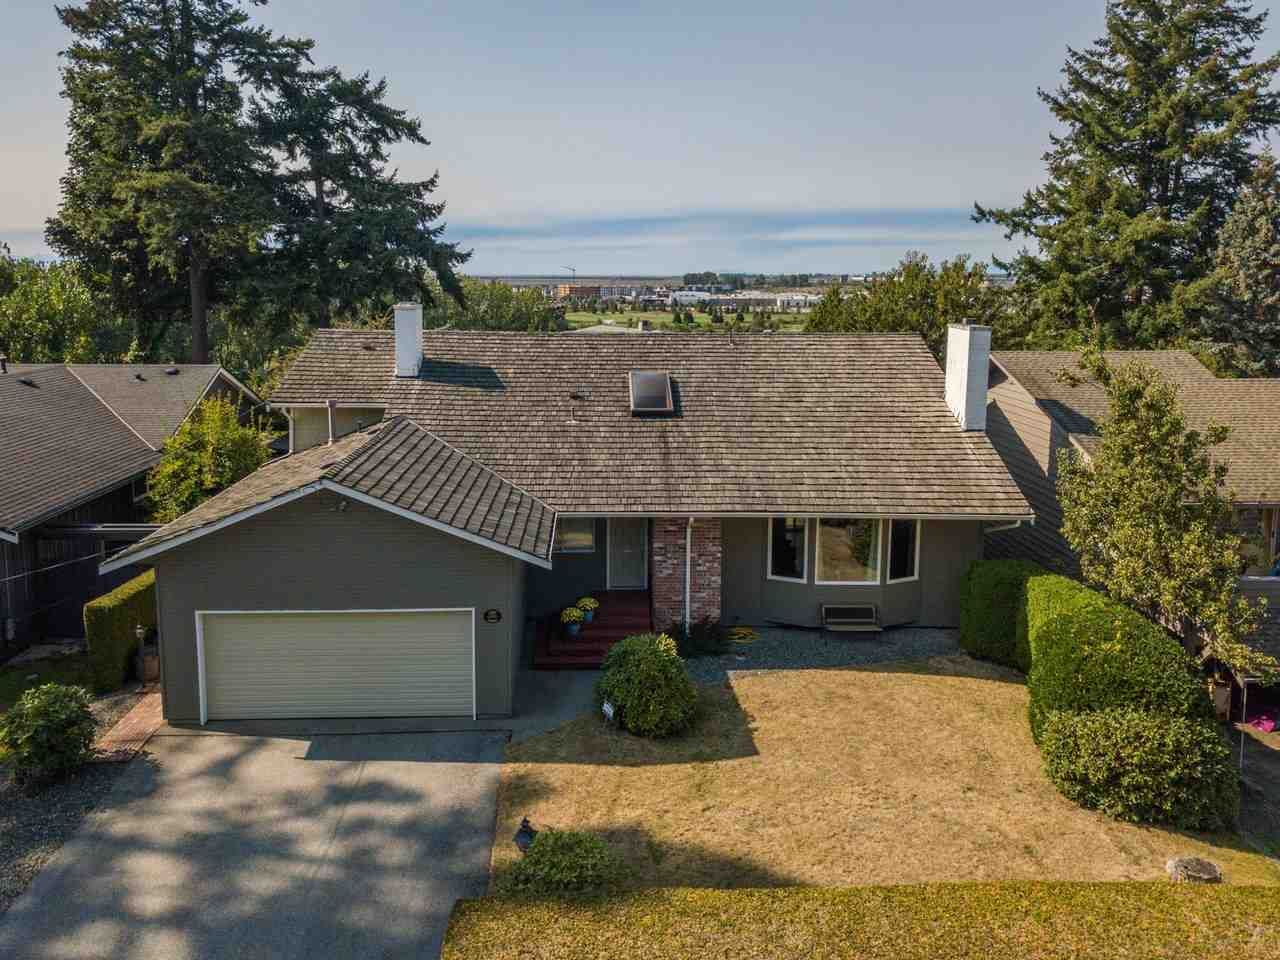 Main Photo: 5309 UPLAND Drive in Delta: Cliff Drive House for sale (Tsawwassen)  : MLS®# R2527108